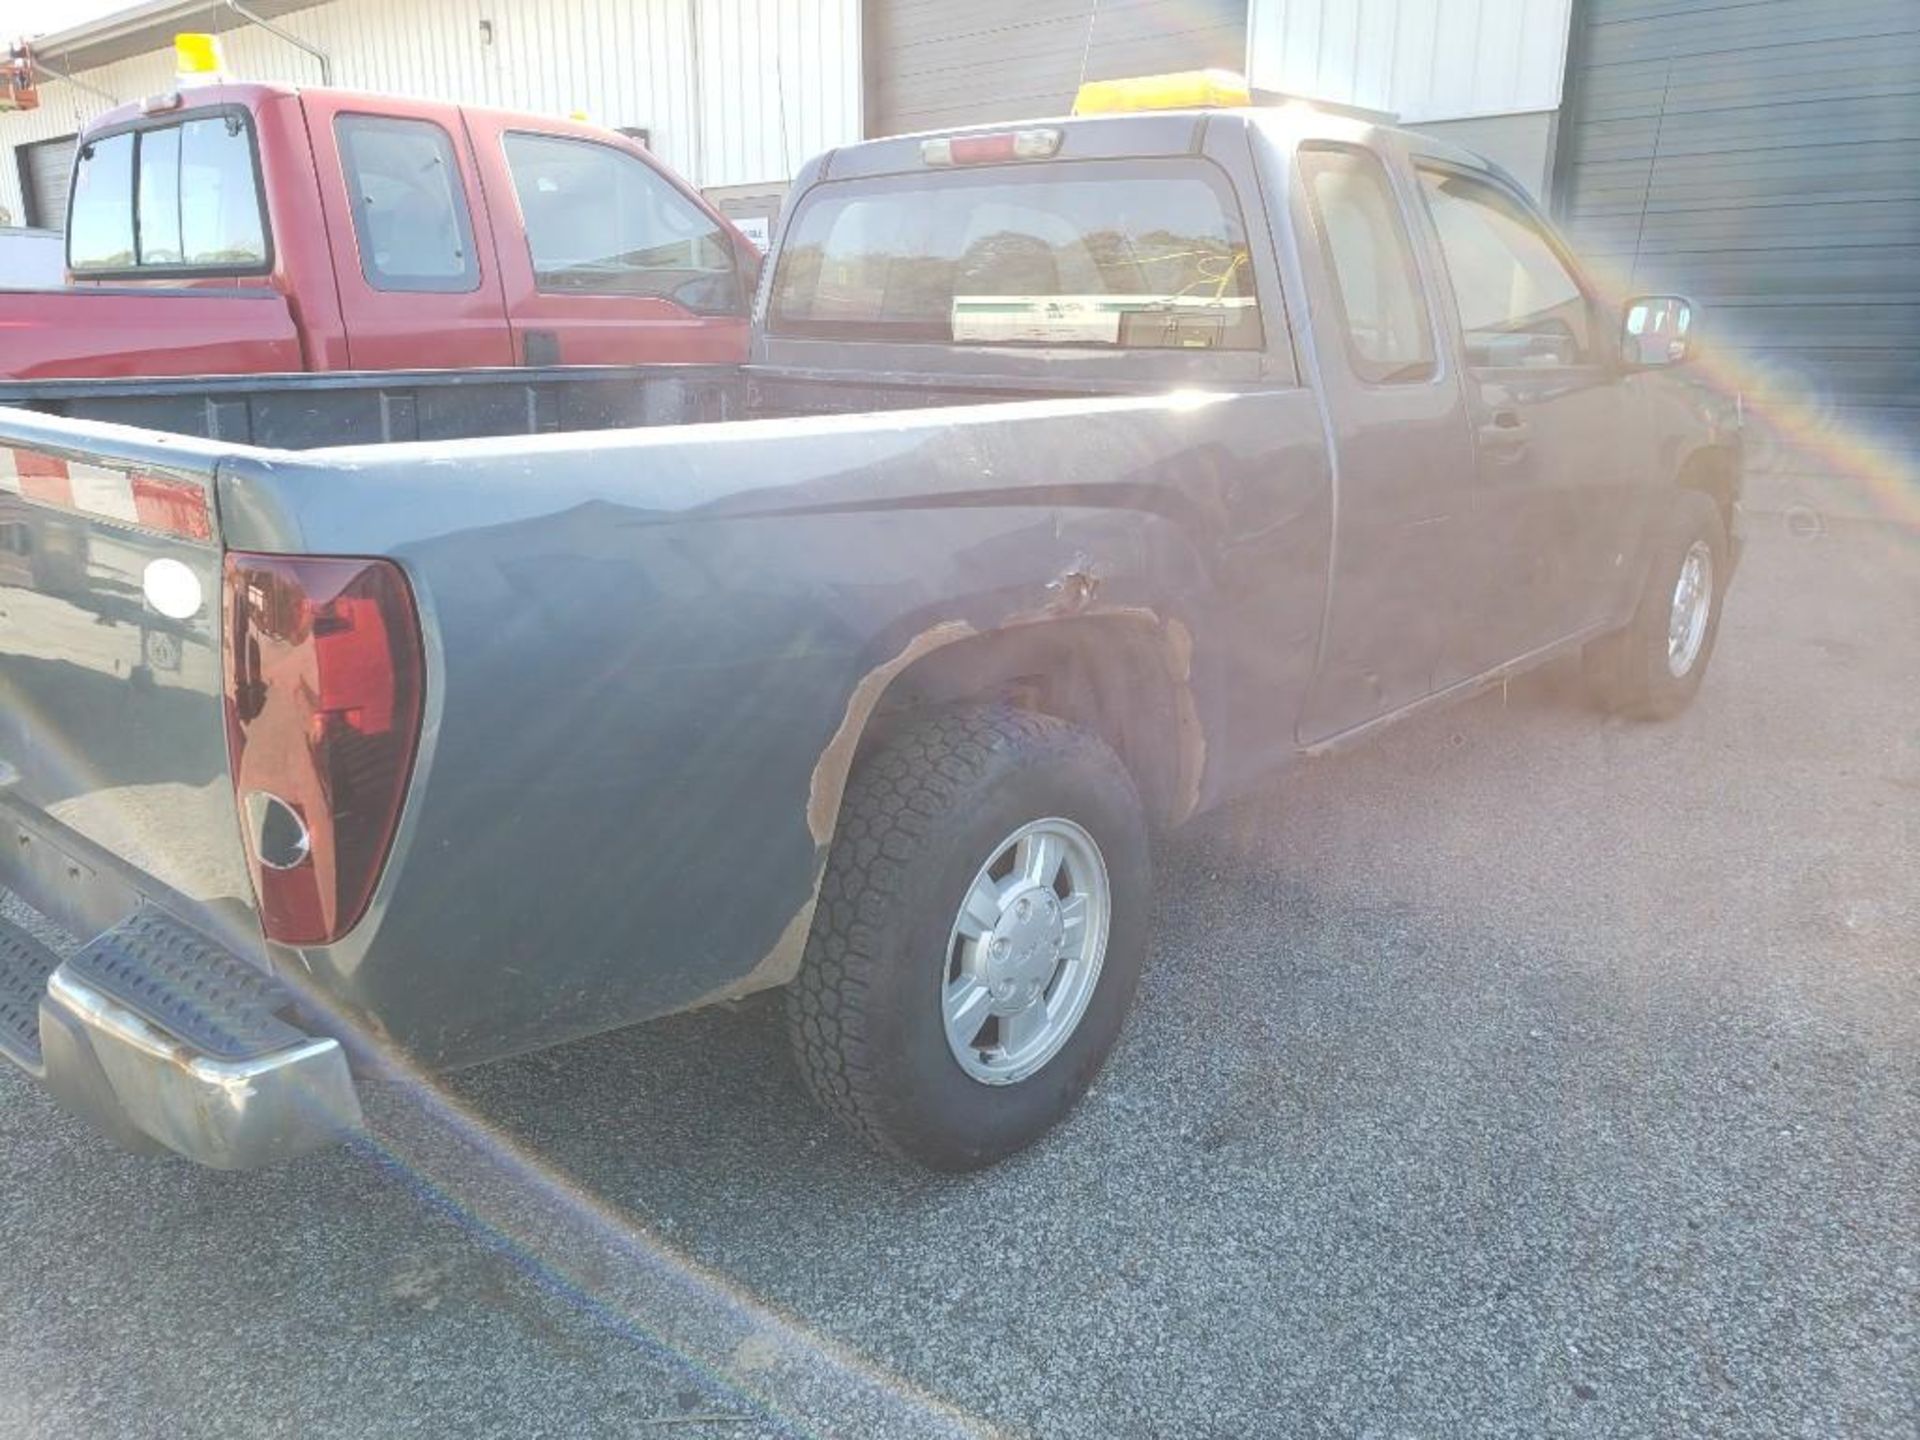 2006 Chevrolet Colorado. VIN 1GCCS196868135452. Frame has rust and one hole can be seen. - Image 20 of 25